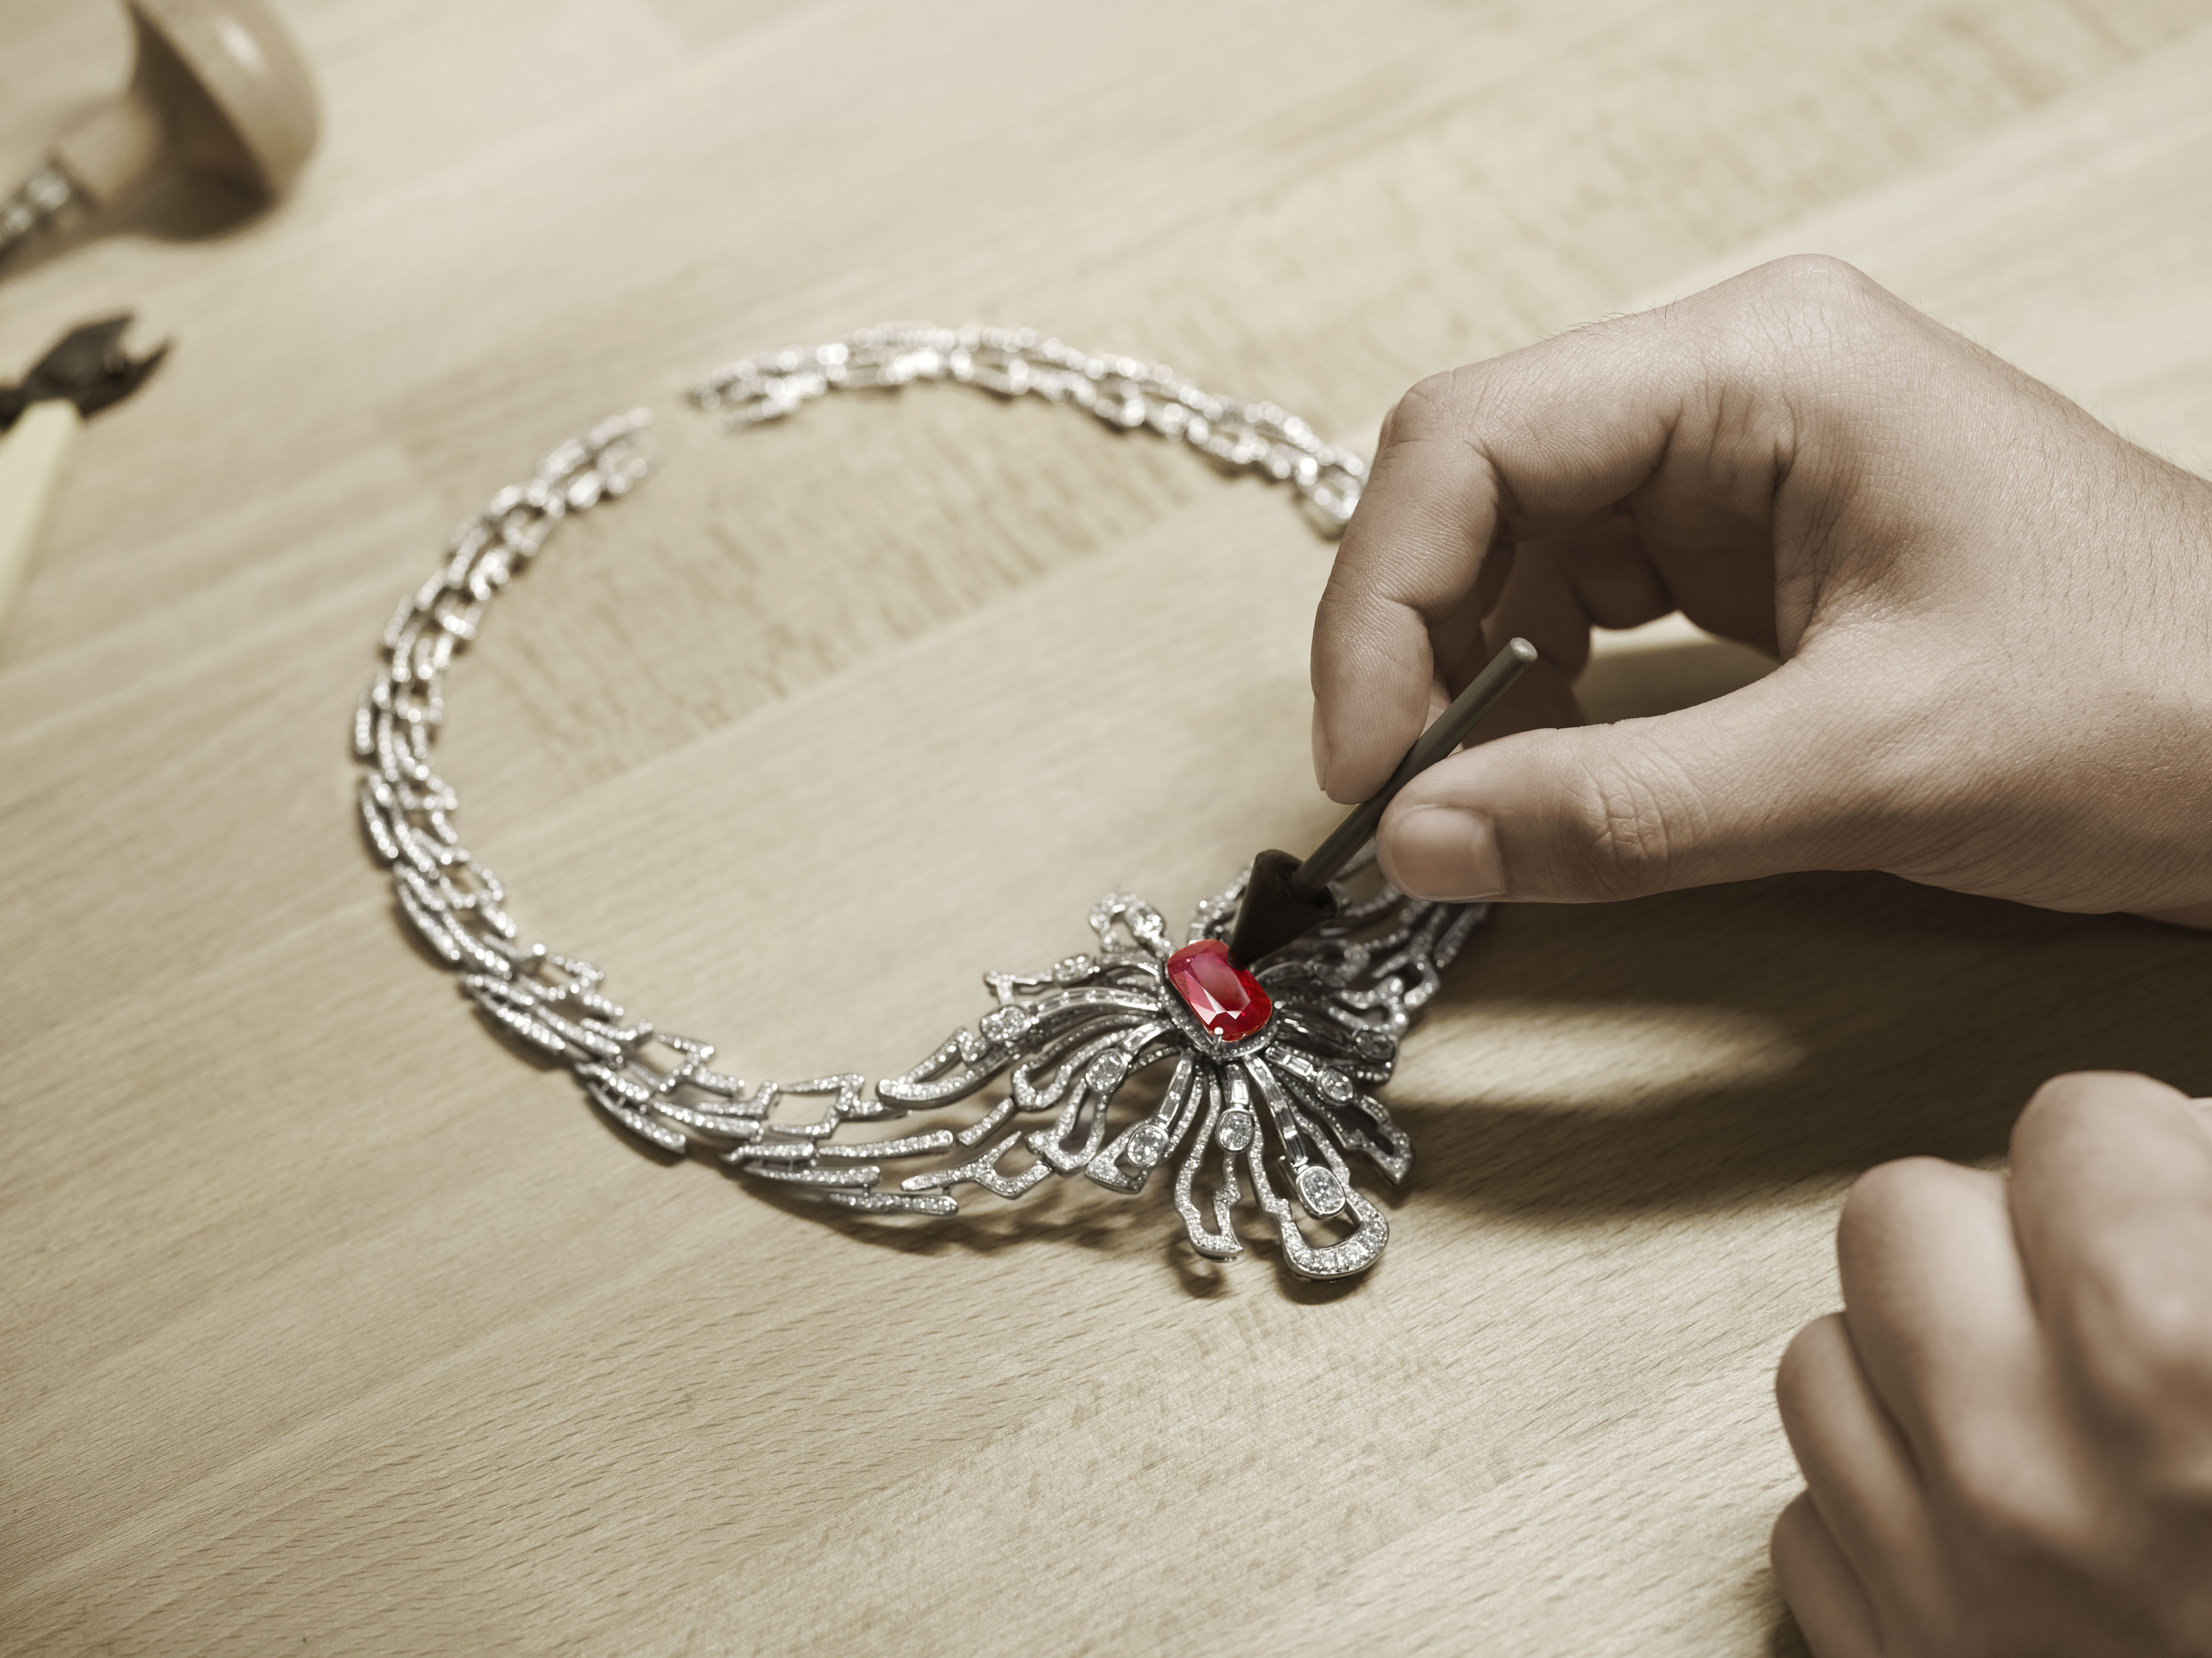 The making of the Wings of a Dragonfly ruby necklace.